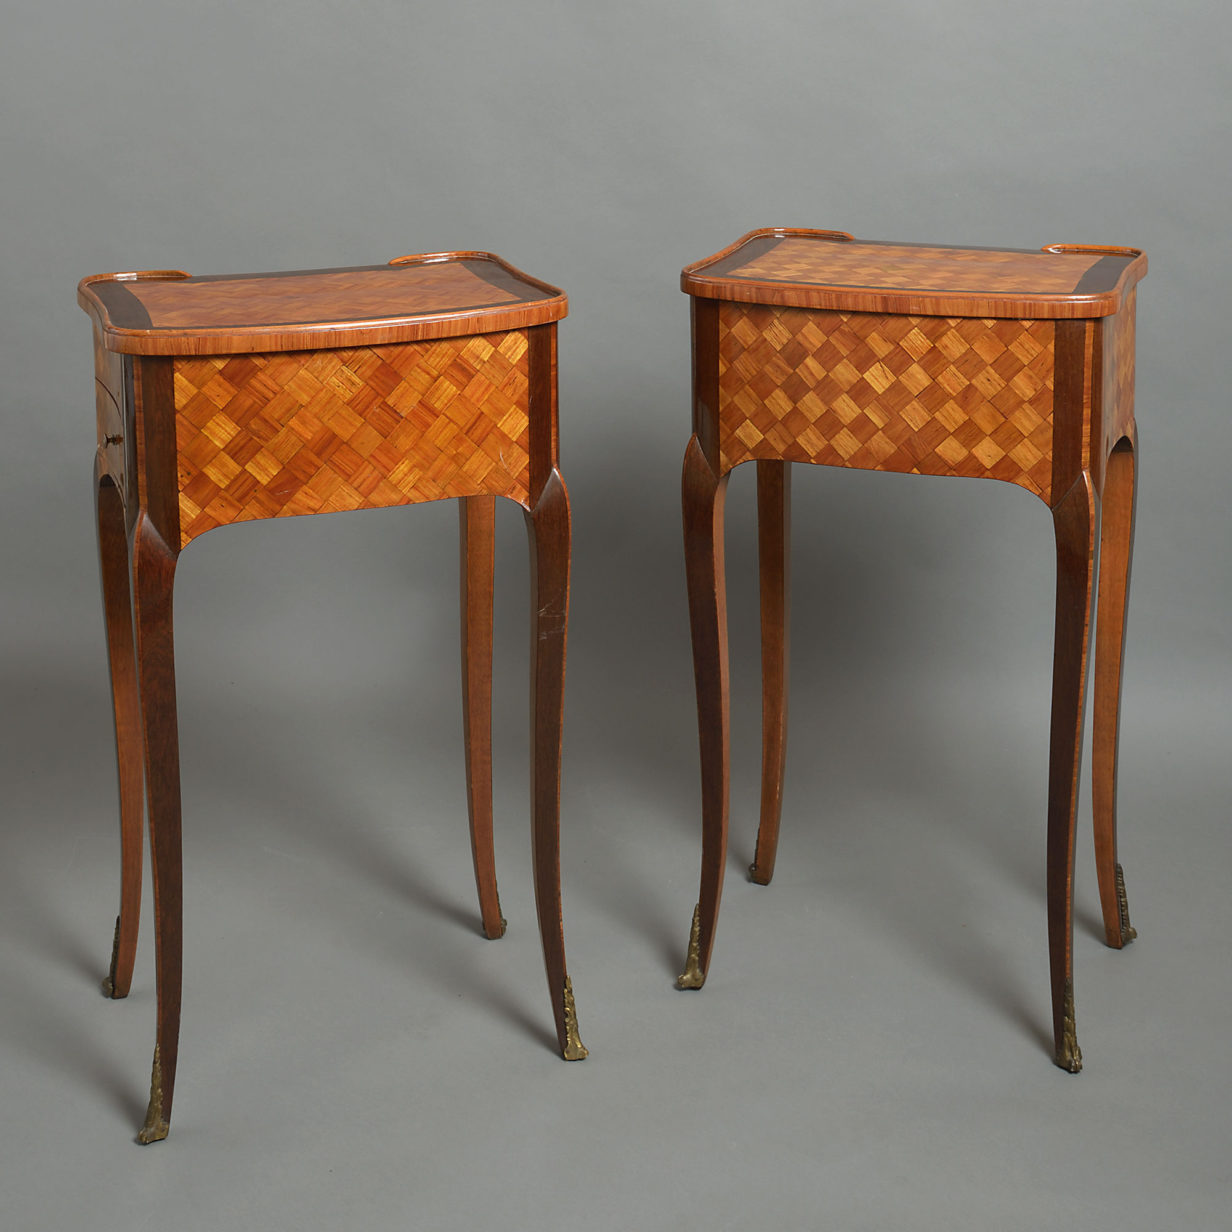 A pair of parquetry bedside cabinets